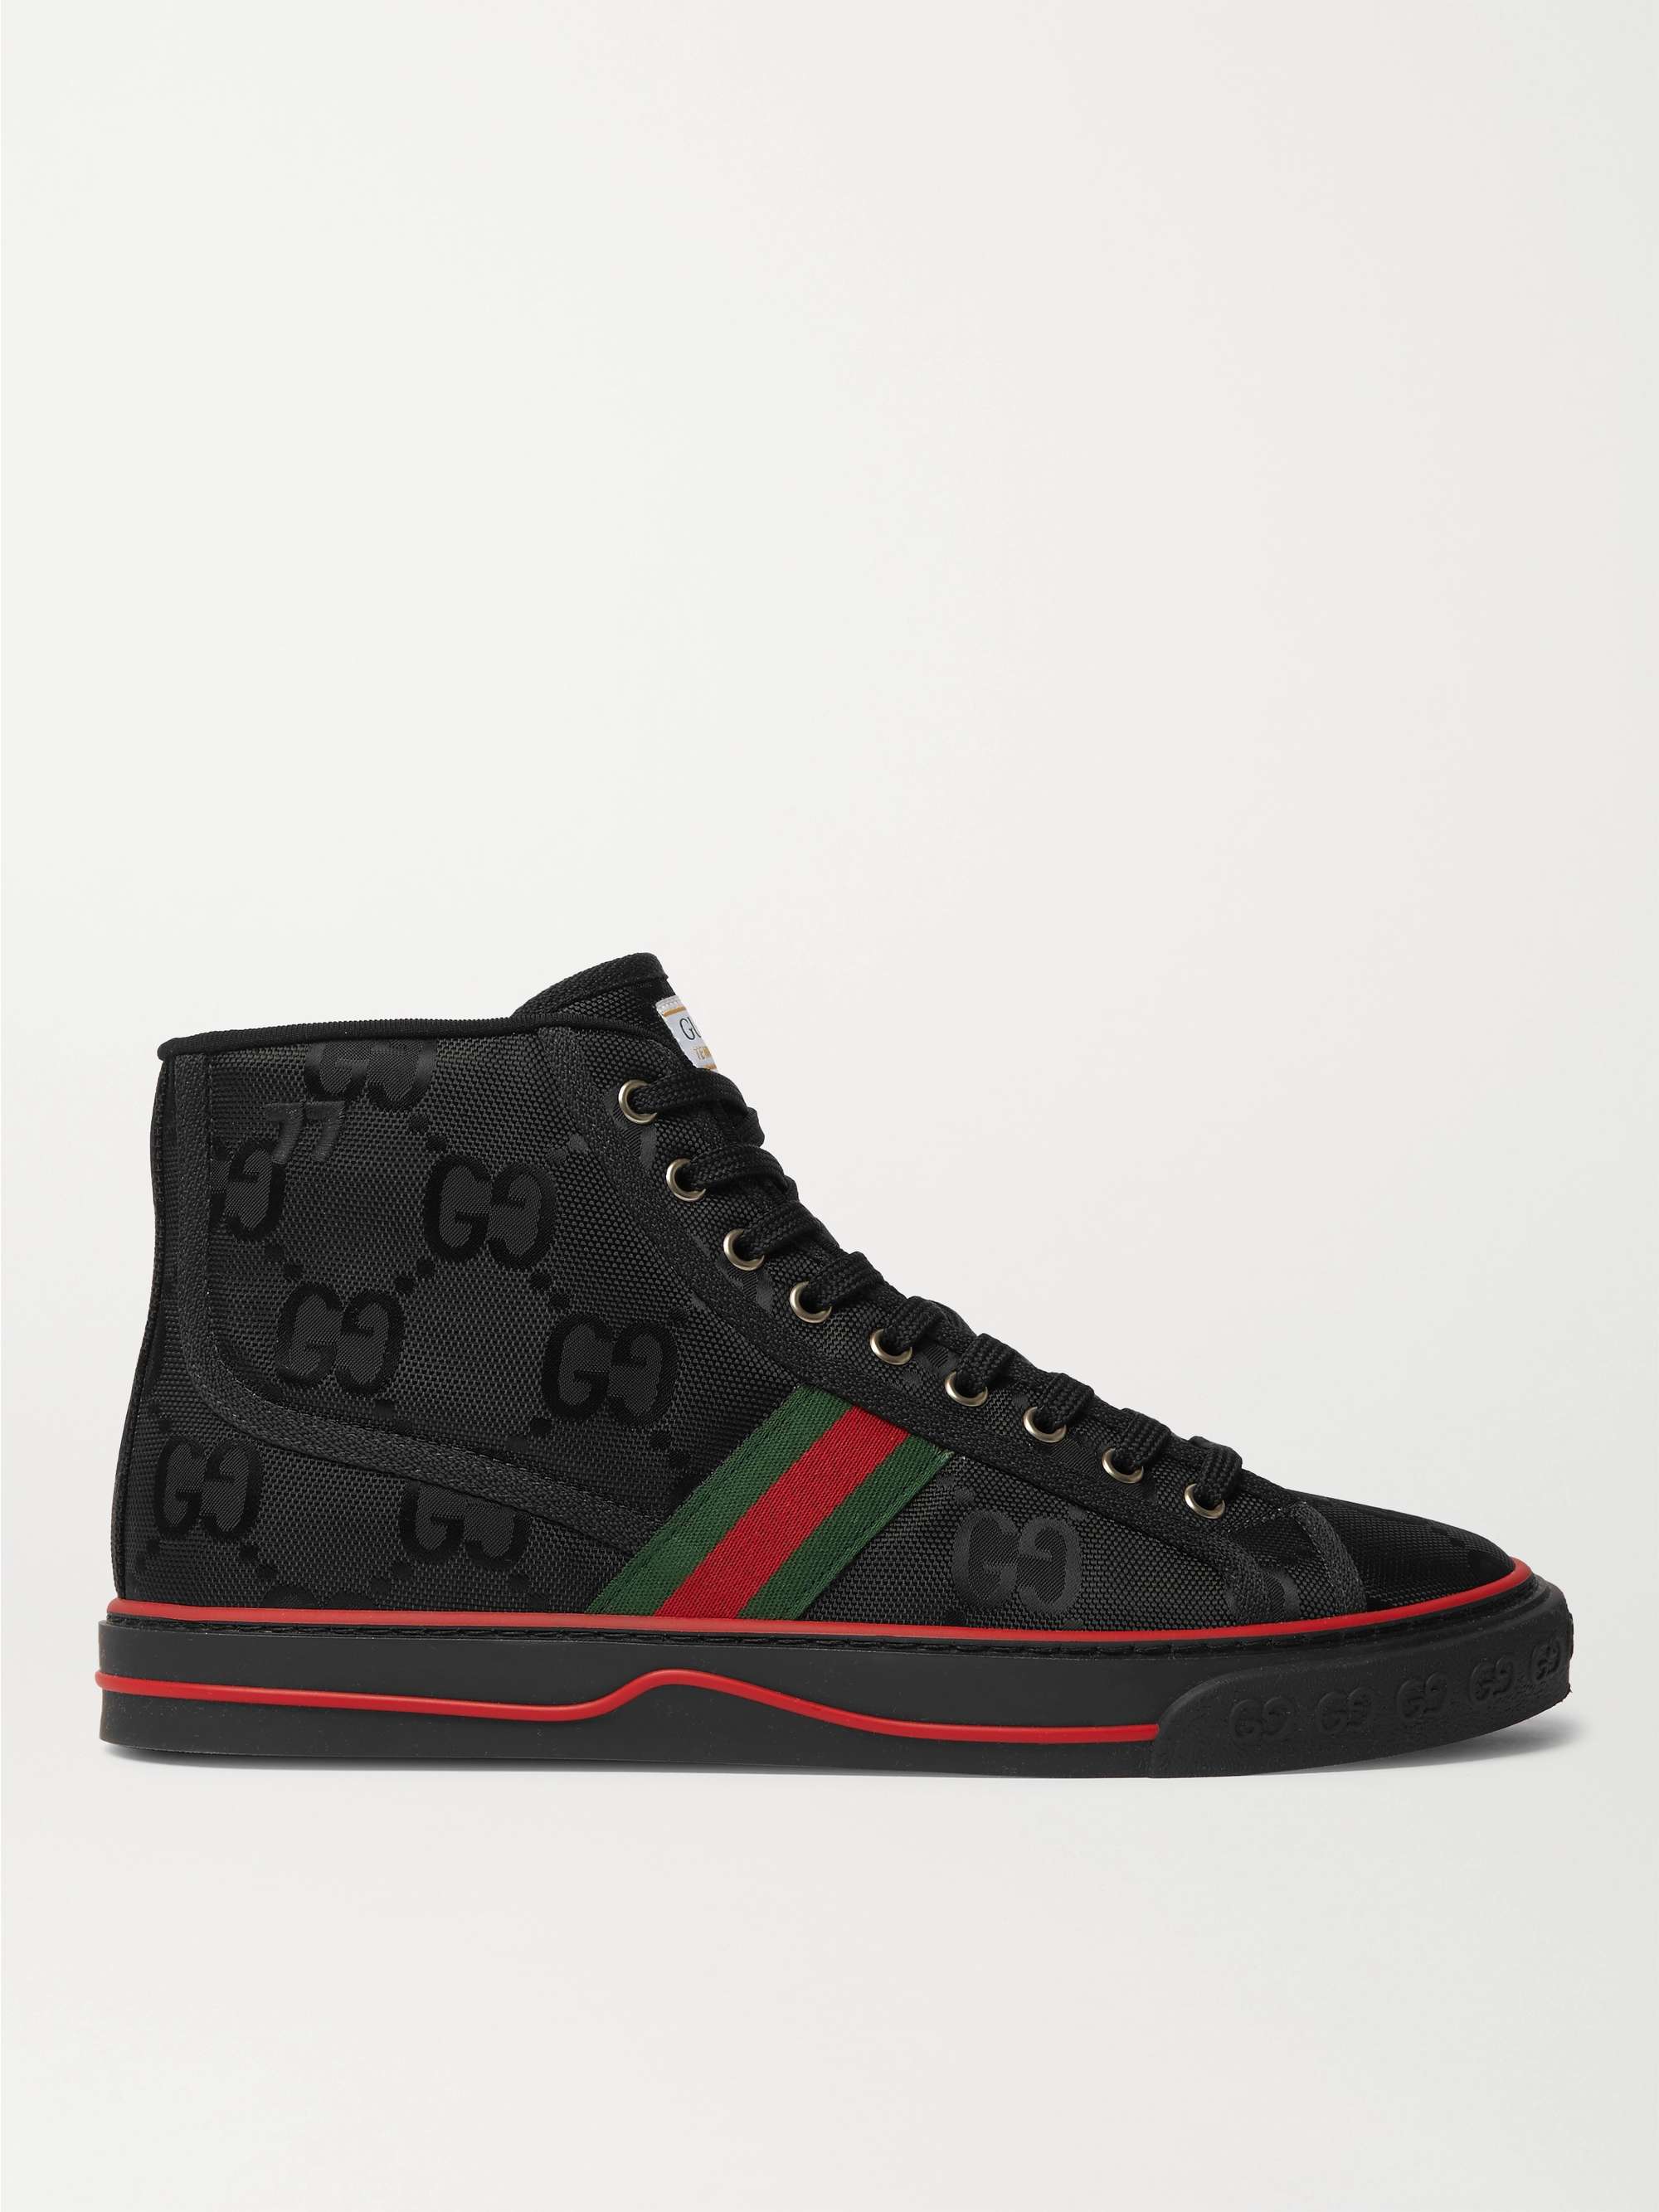 Gucci Mac80 Leather and logo-embroidered Mesh High-Top Sneakers - Men - Black Sneakers - UK 11